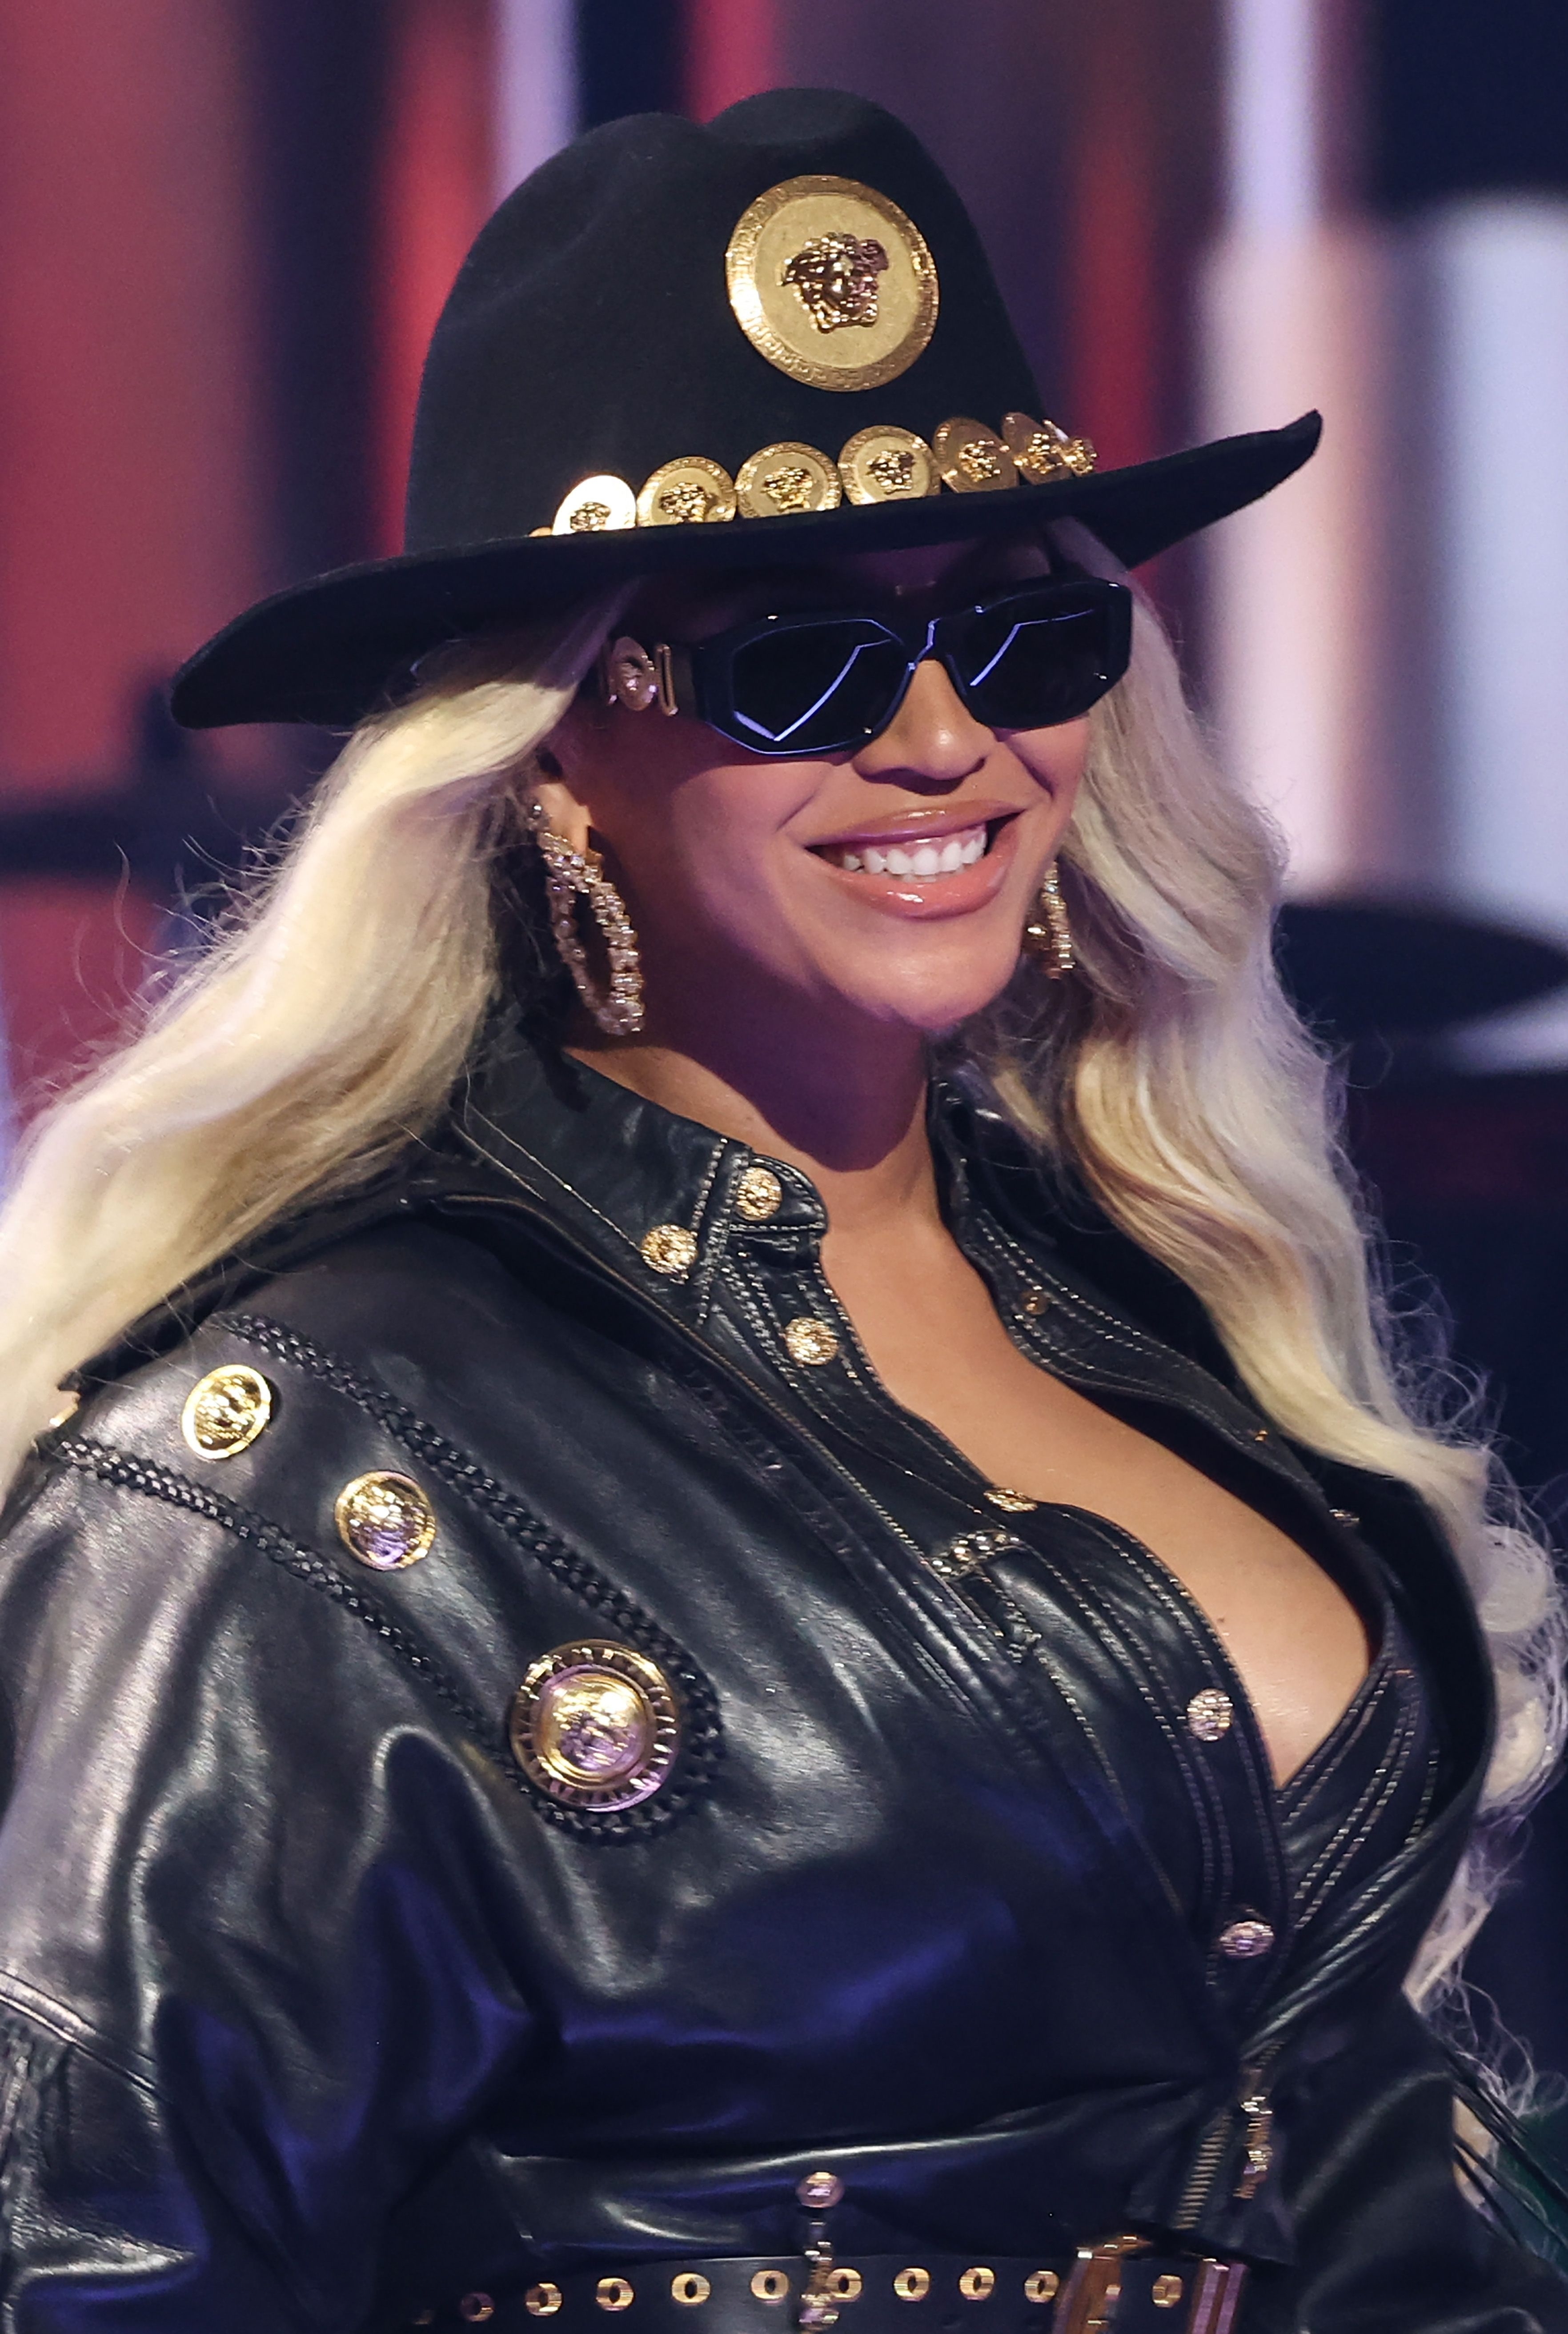 Closeup of Beyoncé in a leather cow-boy inspired outfit with a matching cowboy hat and sunglasses